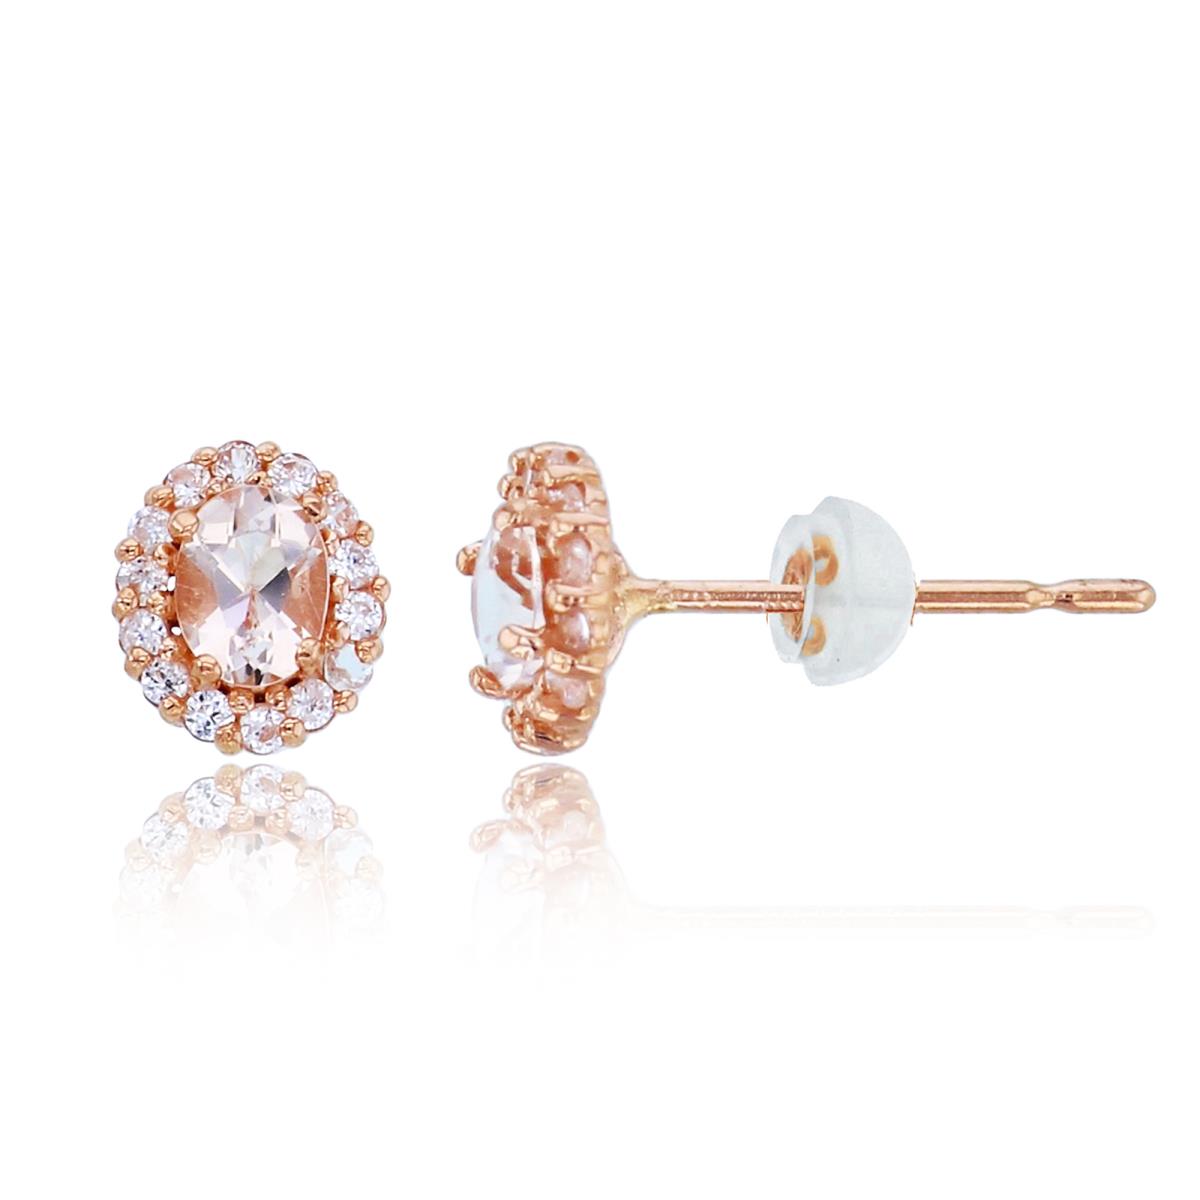 10K Rose Gold 4x3mm Ov Morganite & Wh.Zircon Halo Oval Studs with Silicon Backs